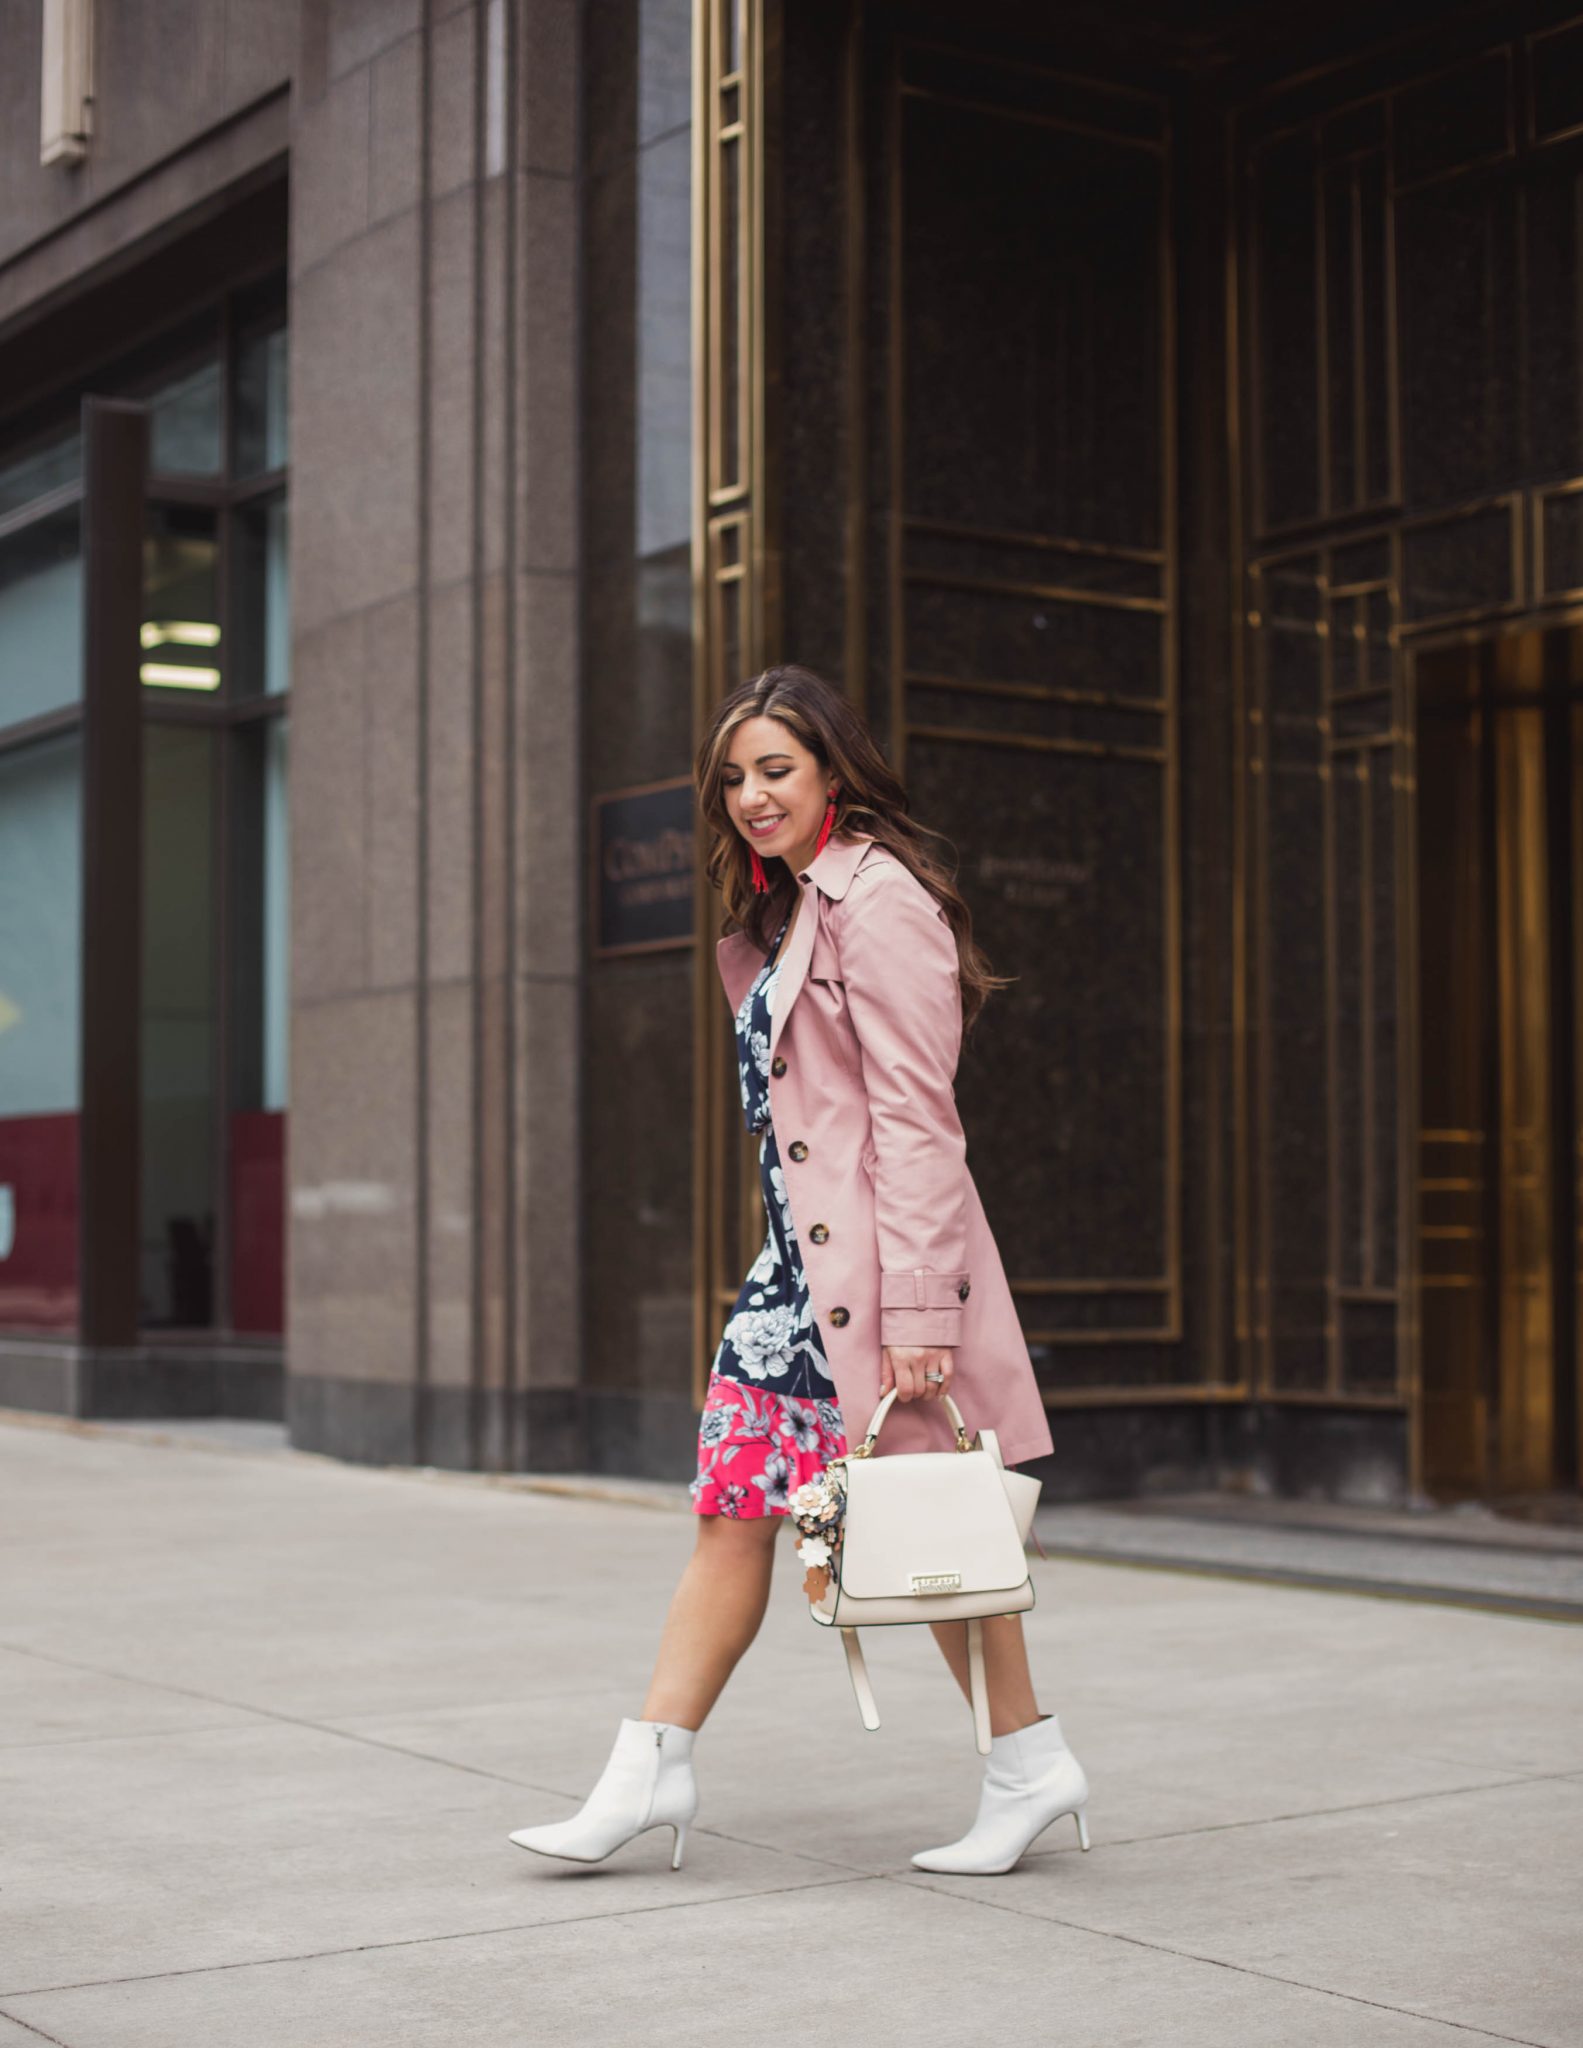 Lifestyle blogger Roxanne of Glass of Glam wearing an Eliza J dress, white booties, Zac Posen bag, and a pink trench coat - Spring Trench Coats styled by popular Chicago fashion blogger Glass of Glam